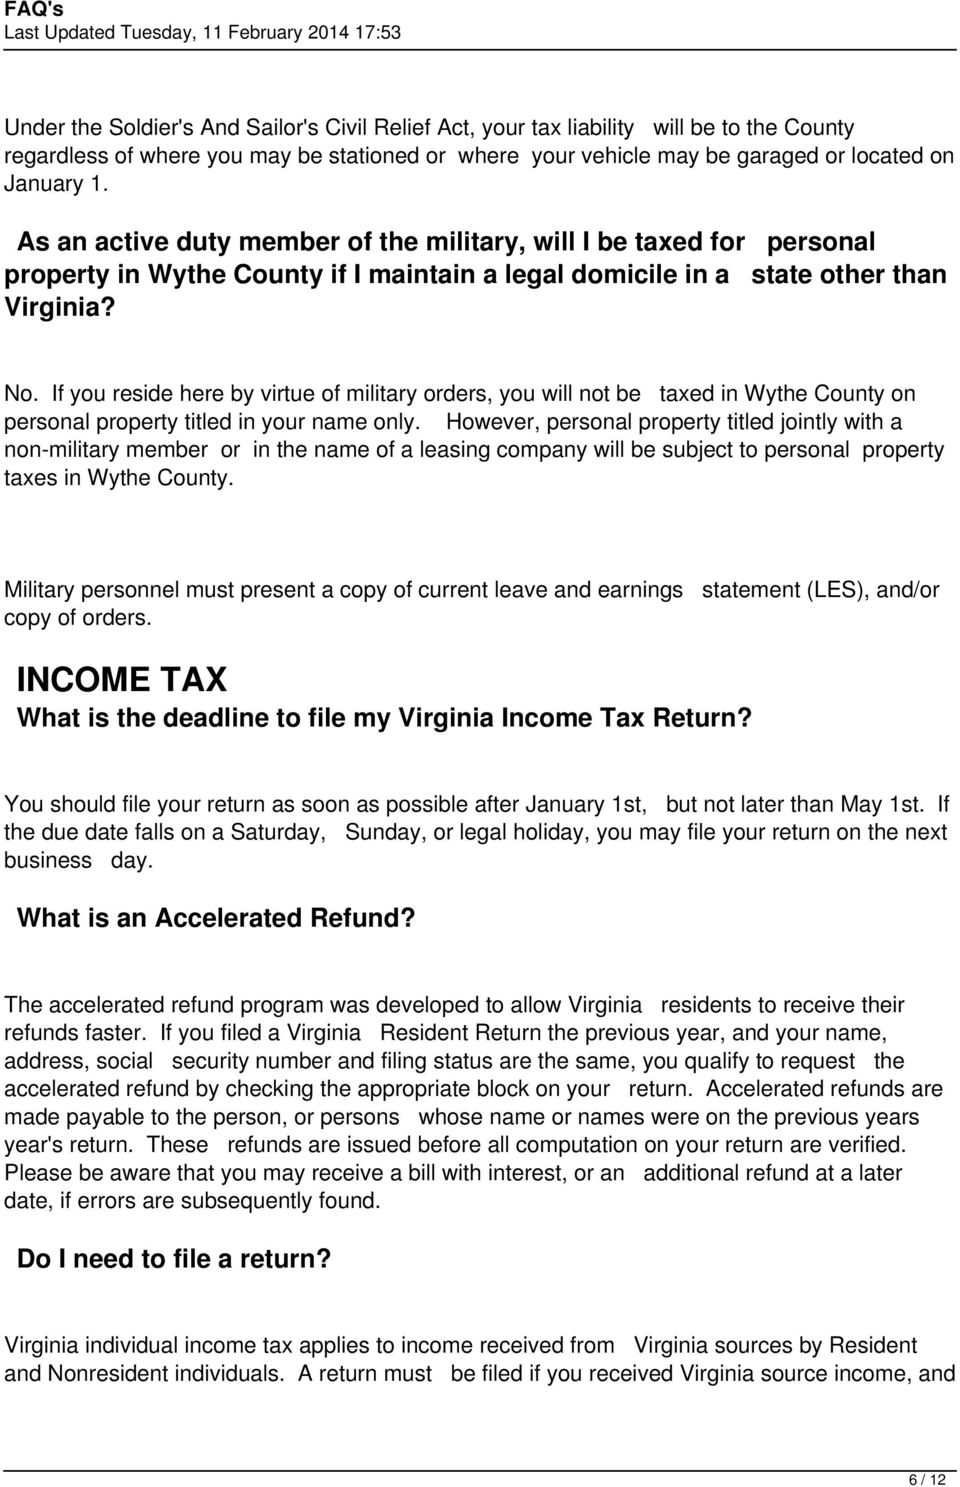 If you reside here by virtue of military orders, you will not be taxed in Wythe County on personal property titled in your name only.